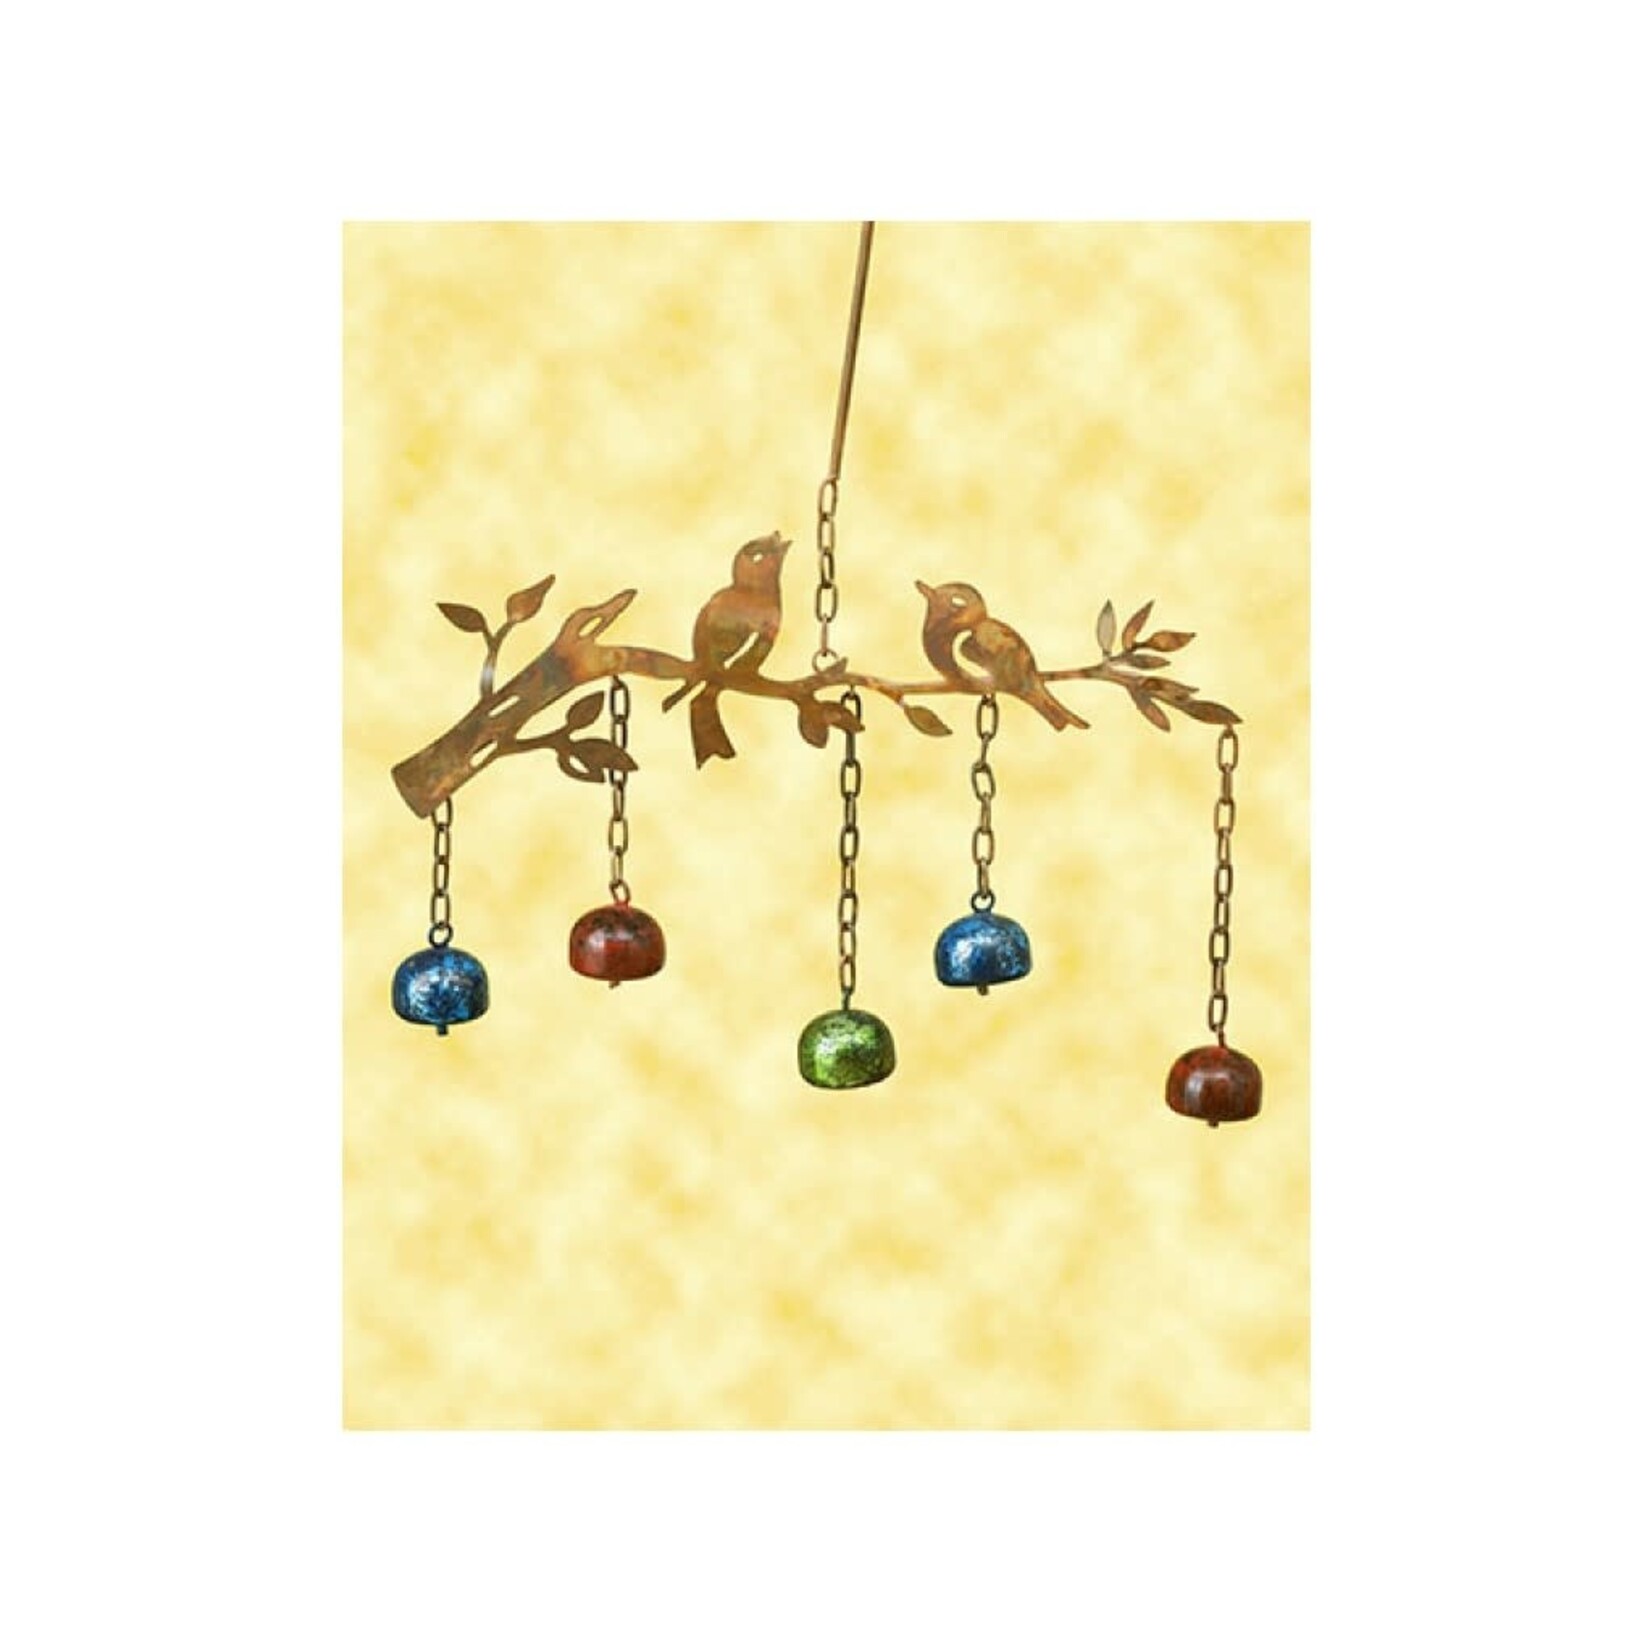 Chime - Birds with Colorful Bells